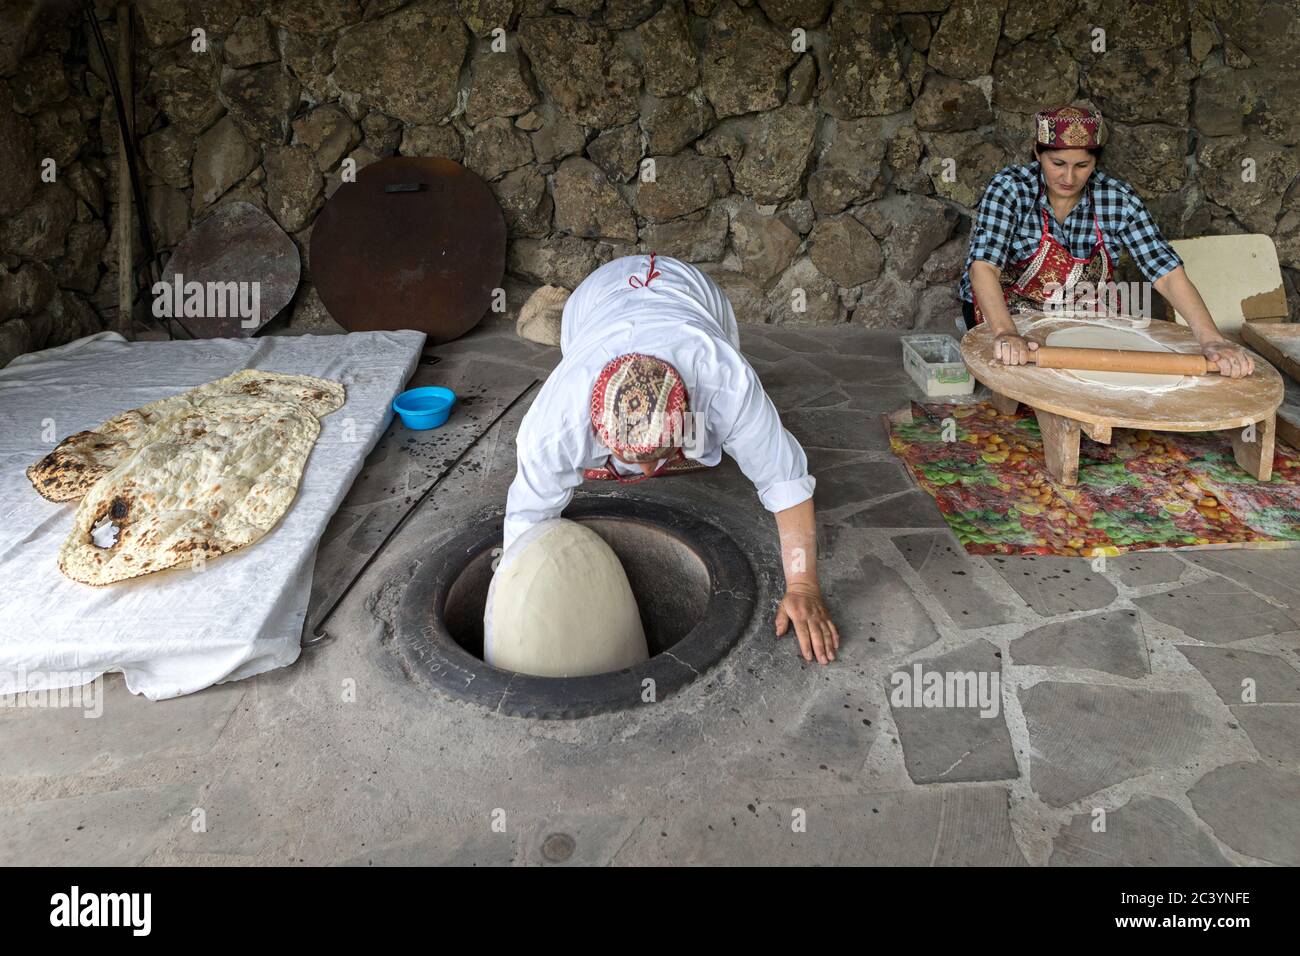 Women preparing Lavash (Armenian Unleavened Flatbread) part of the staple diet, rolling out and slapping to side of hot clay oven with cushion, Yereva Stock Photo